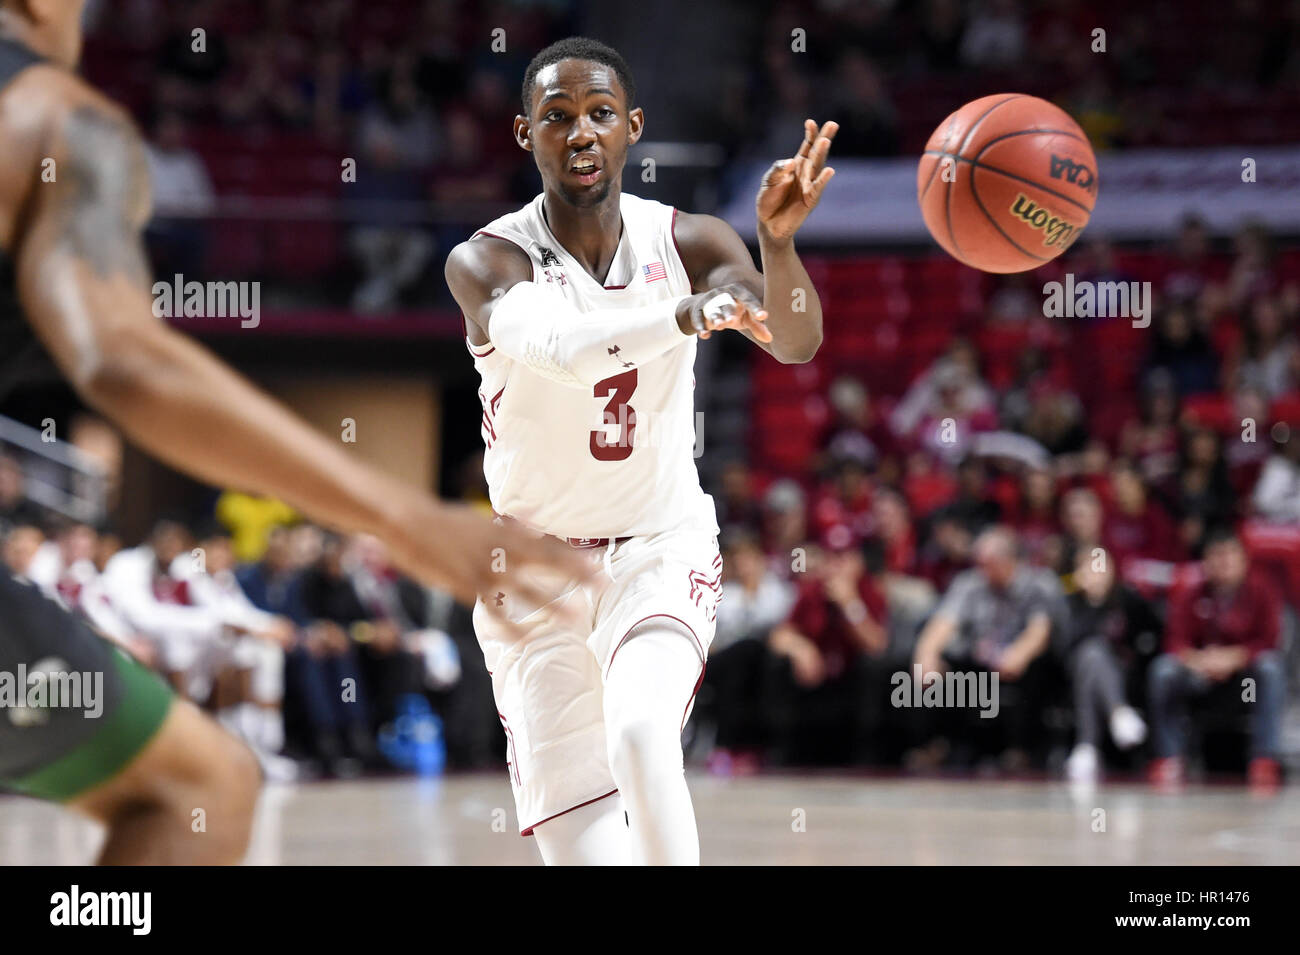 Philadelphia, Pennsylvania, USA. 25th Feb, 2017. Temple Owls guard SHIZZ ALSTON JR. (3) passes the ball to the wing during the American Athletic Conference basketball game being played at the Liacouras Center in Philadelphia. Temple beat Tulane 86-76 in double overtime. Credit: Ken Inness/ZUMA Wire/Alamy Live News Stock Photo